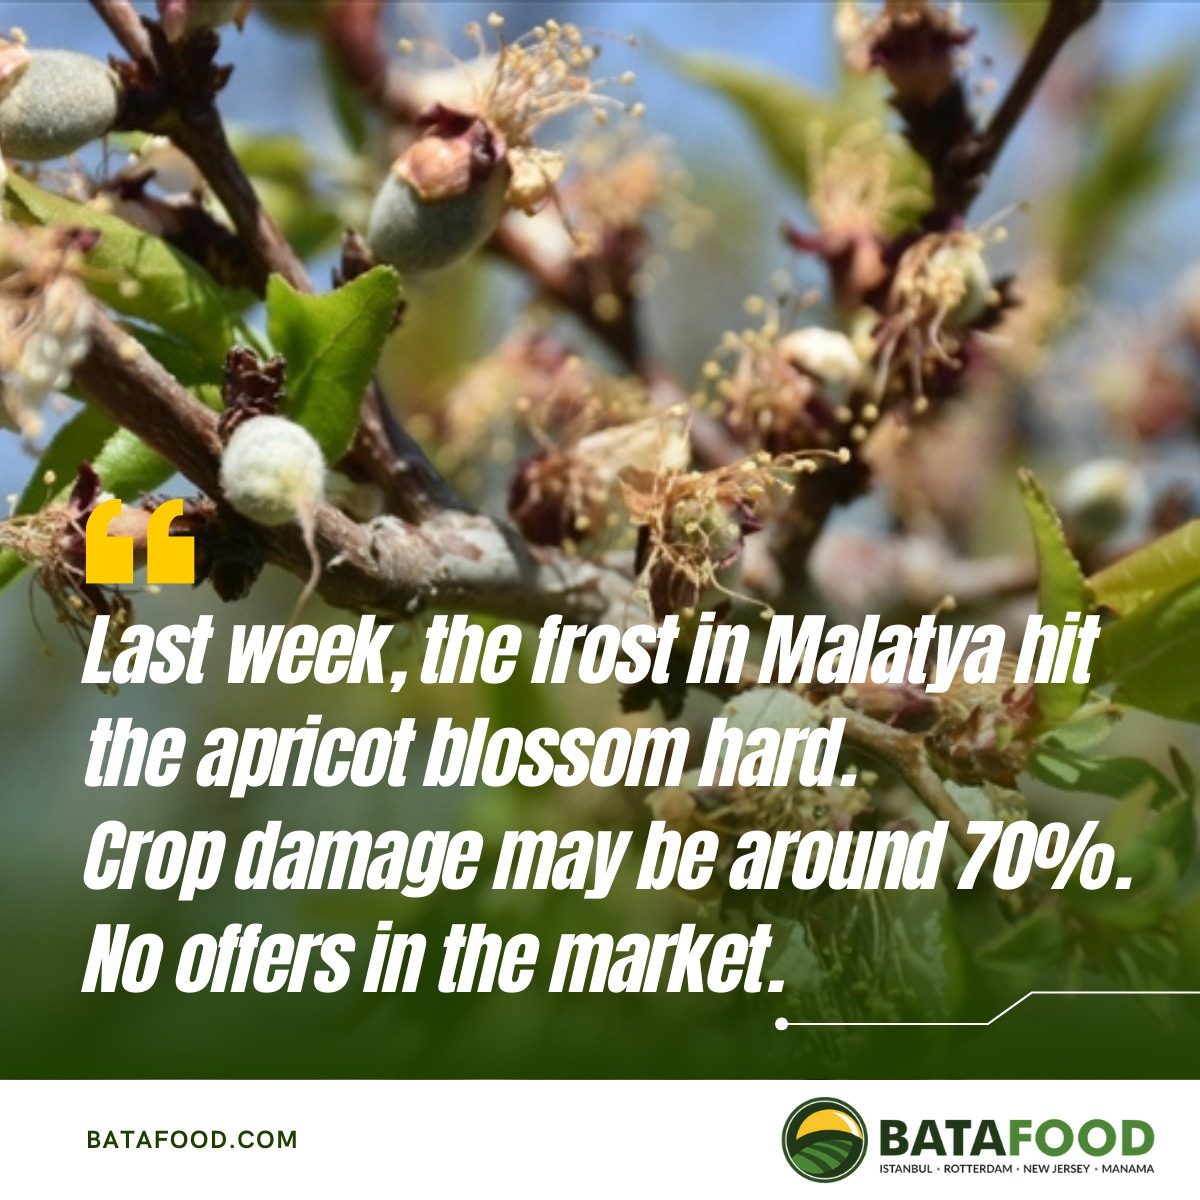 Last week (April 12-13), the frost in Malatya hit the apricot blossom hard.